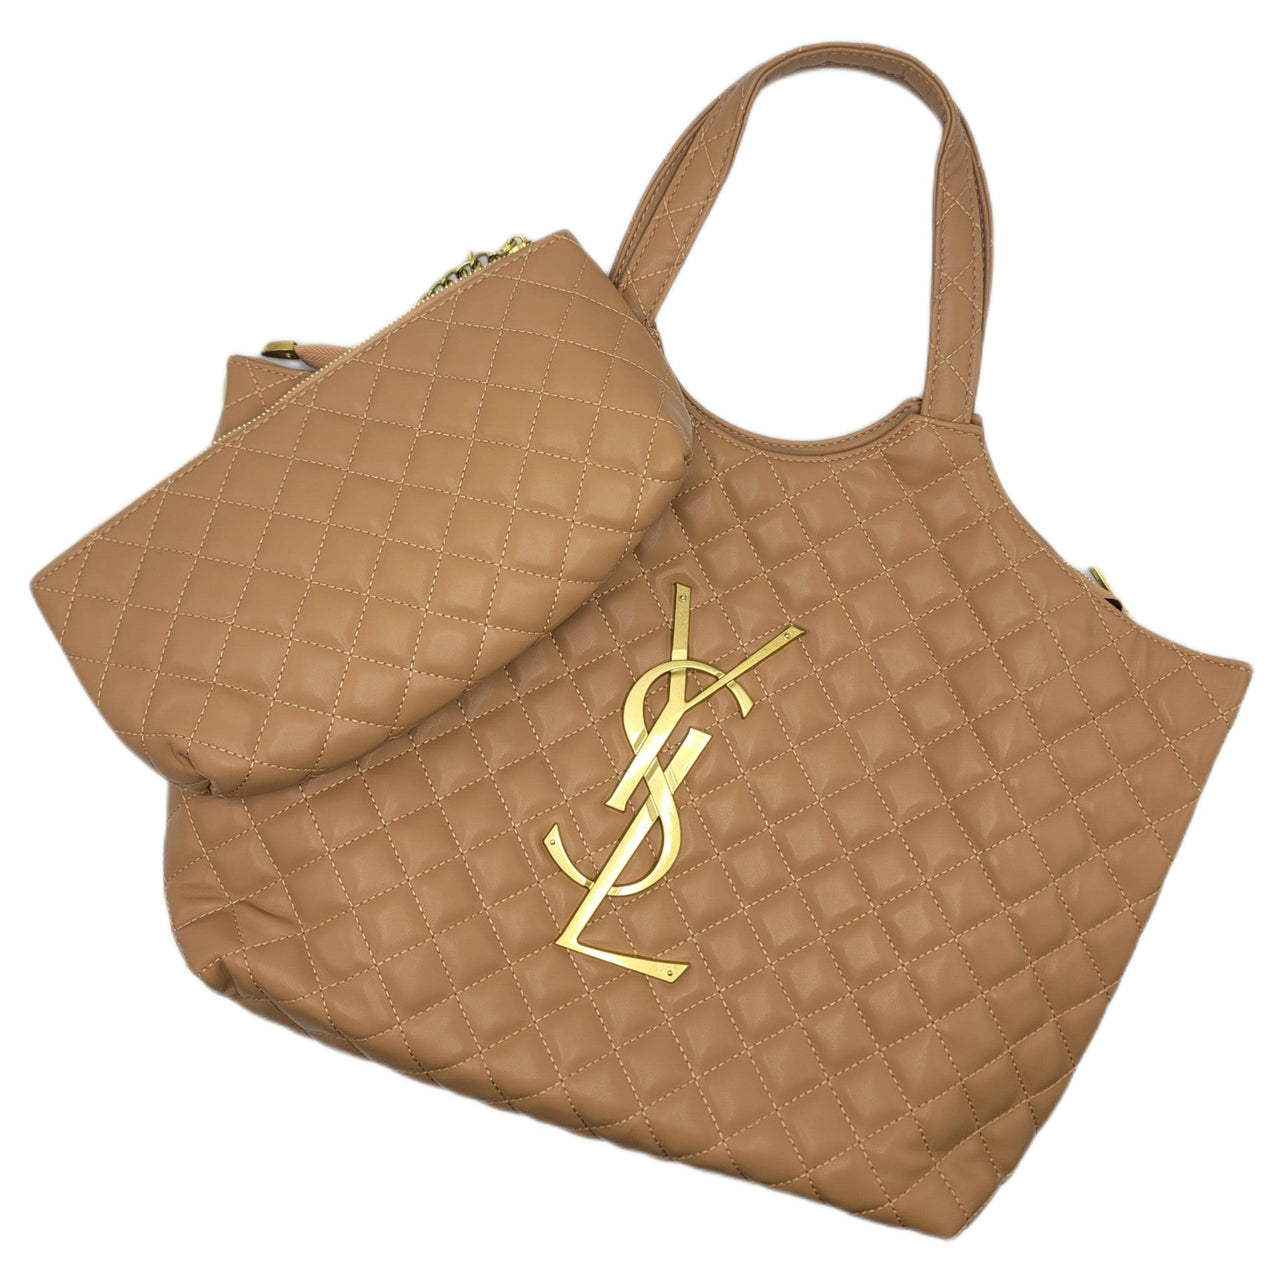 The Bag Couture Handbags, Wallets & Cases Beige YSL iCare Quilted Tote Bag Black/White/Beige